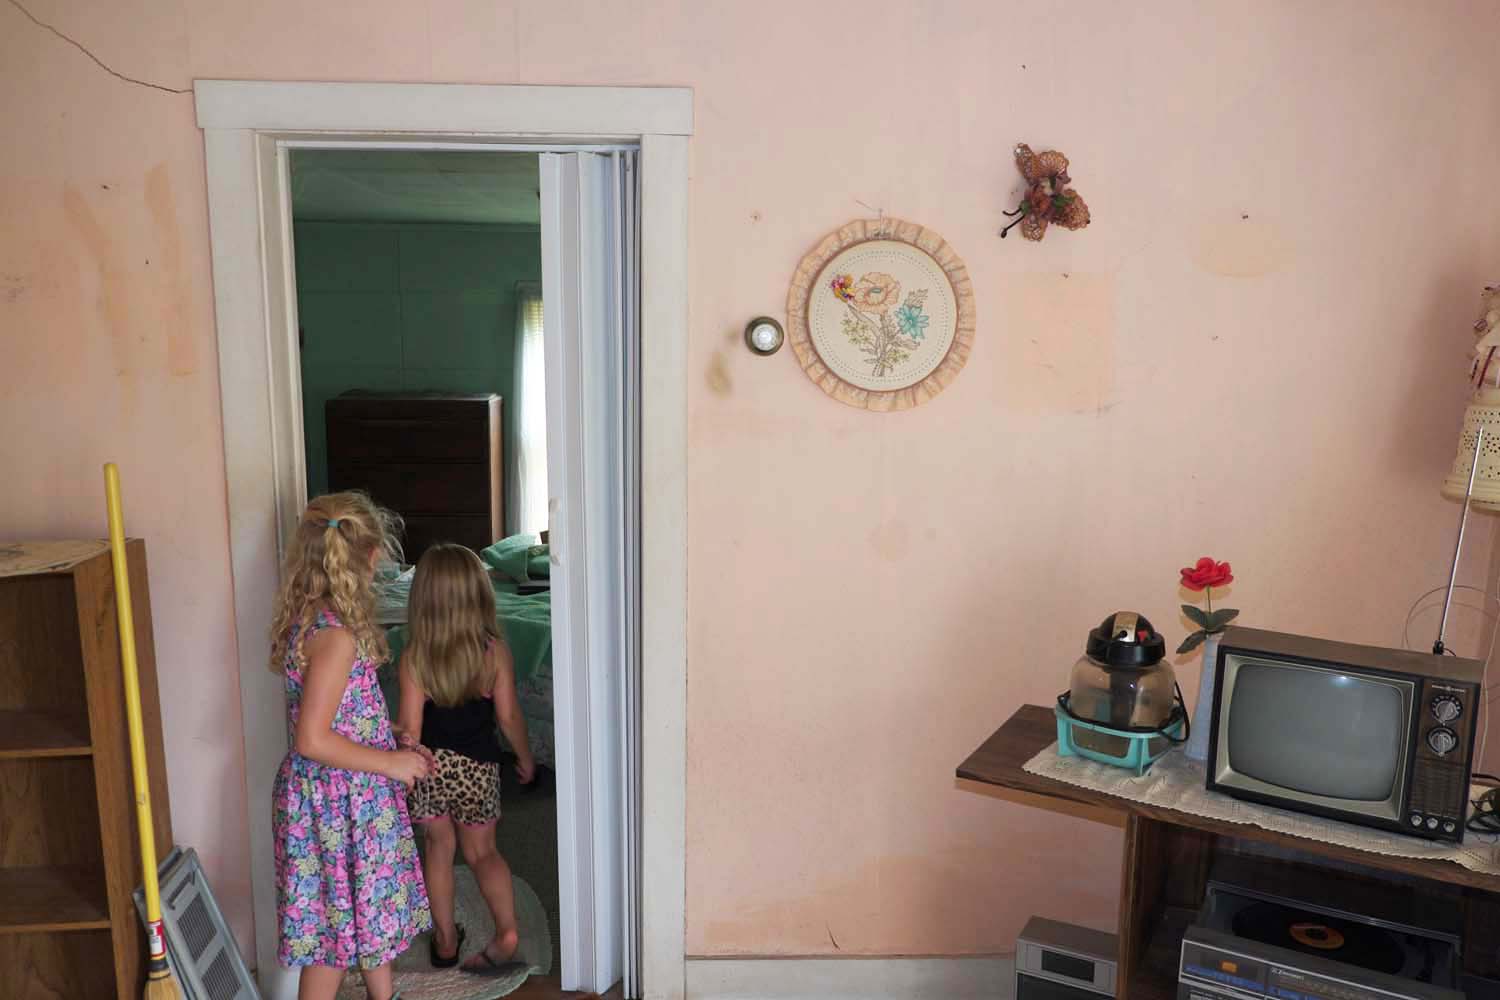  Two girls exploring the inside of a house up for auction. Bowen, IL. October, 2016 